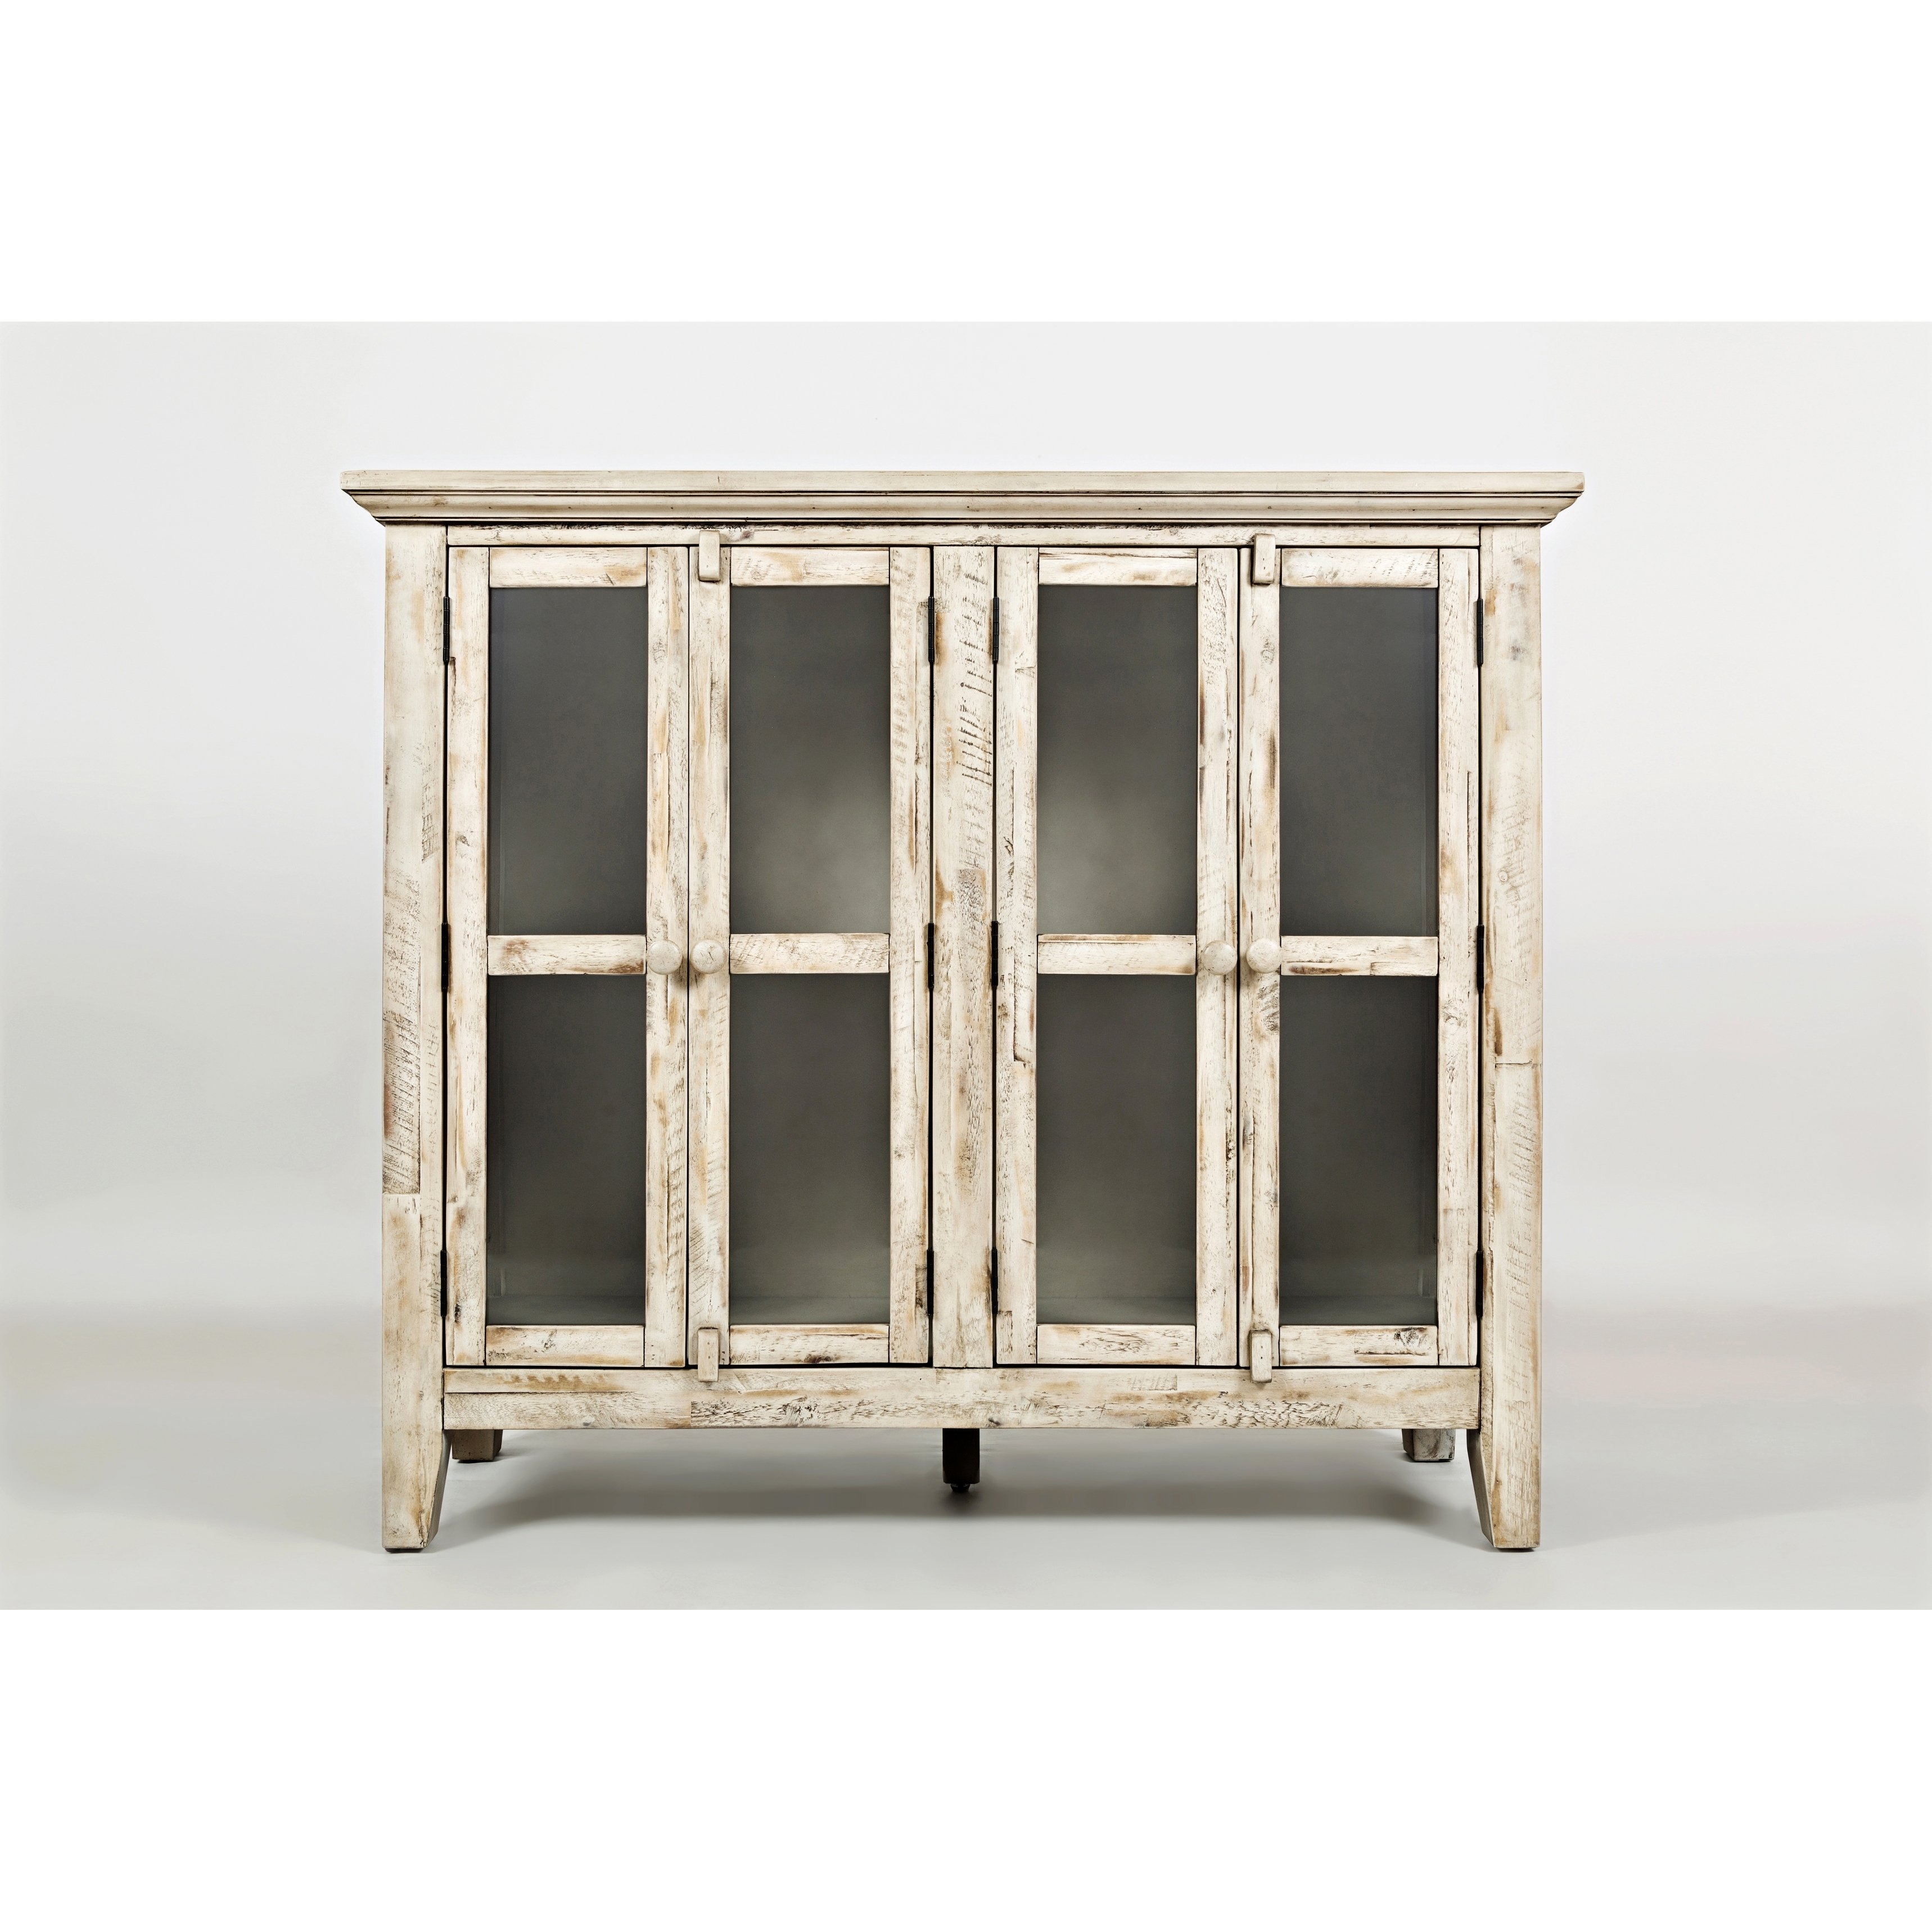 distressed wooden accent cabinet with glass doors off white table free shipping today half moon circular side west elm wall shelf small bedside lamps decorative cabinets for